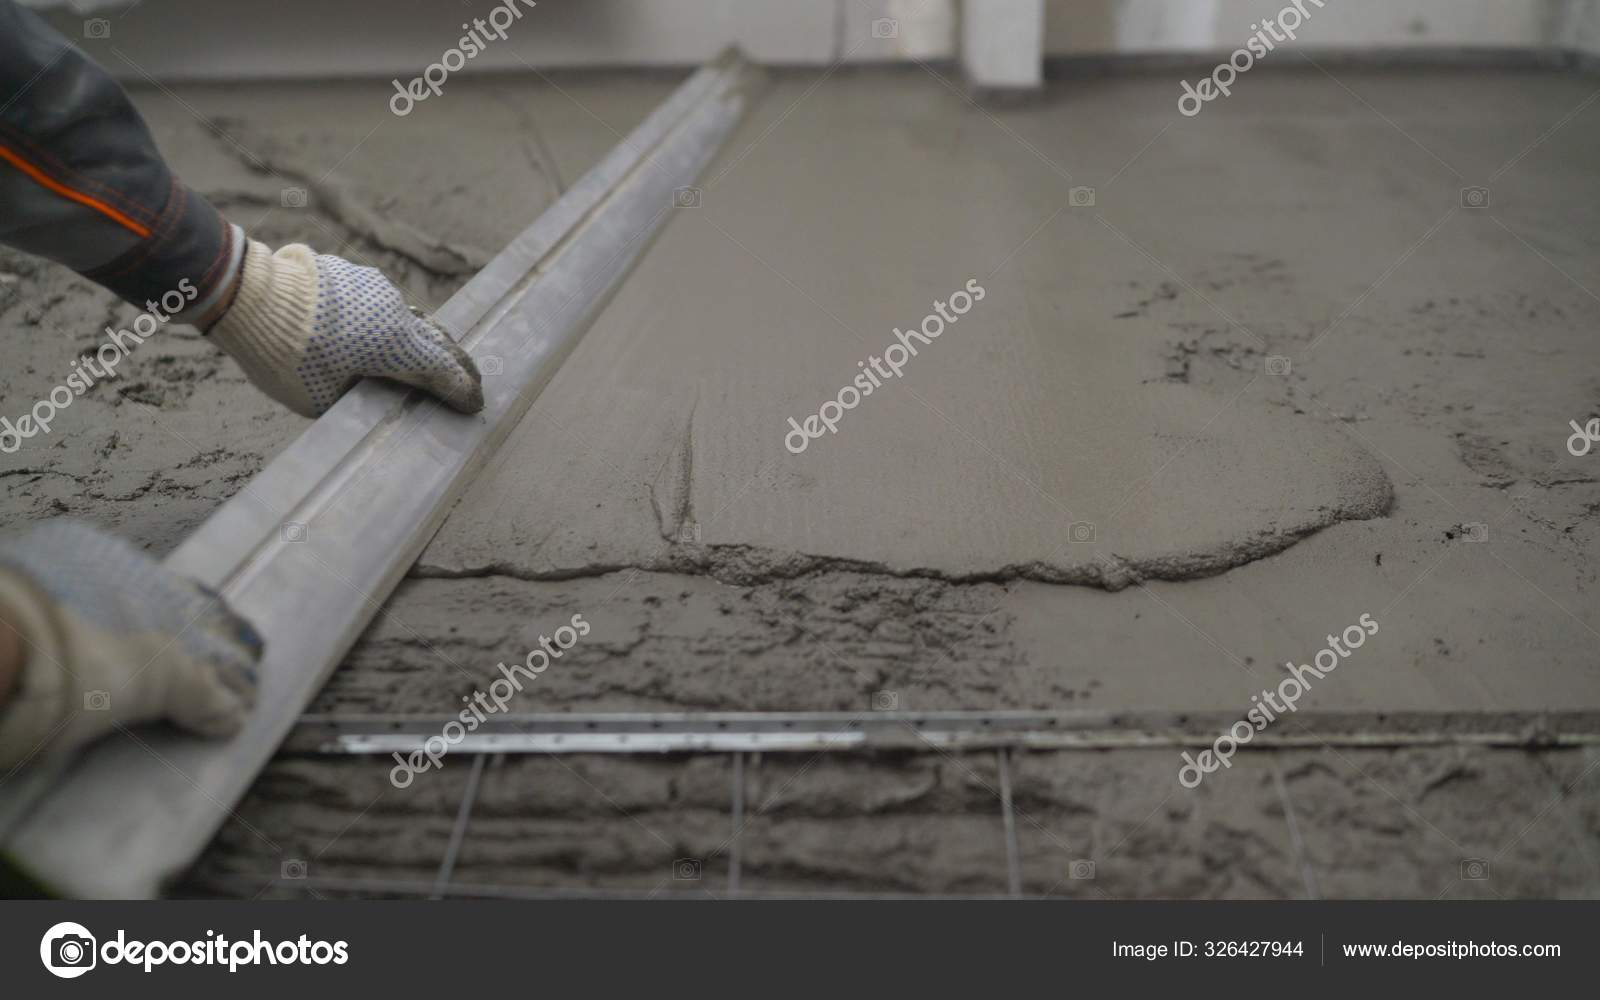 depositphotos 326427944 stock photo leveling the floor with a